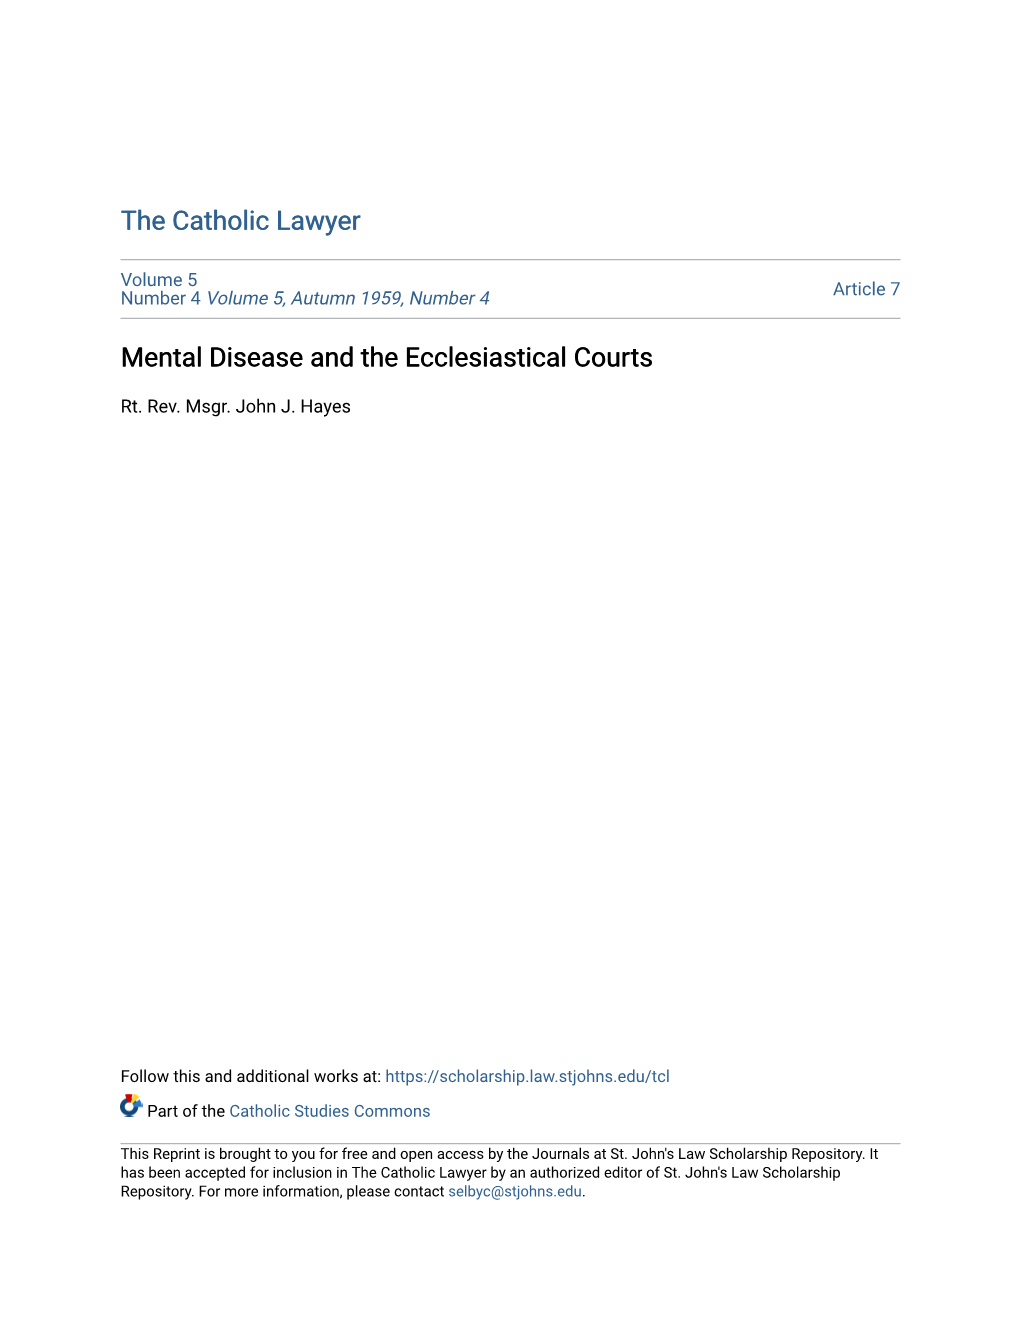 Mental Disease and the Ecclesiastical Courts